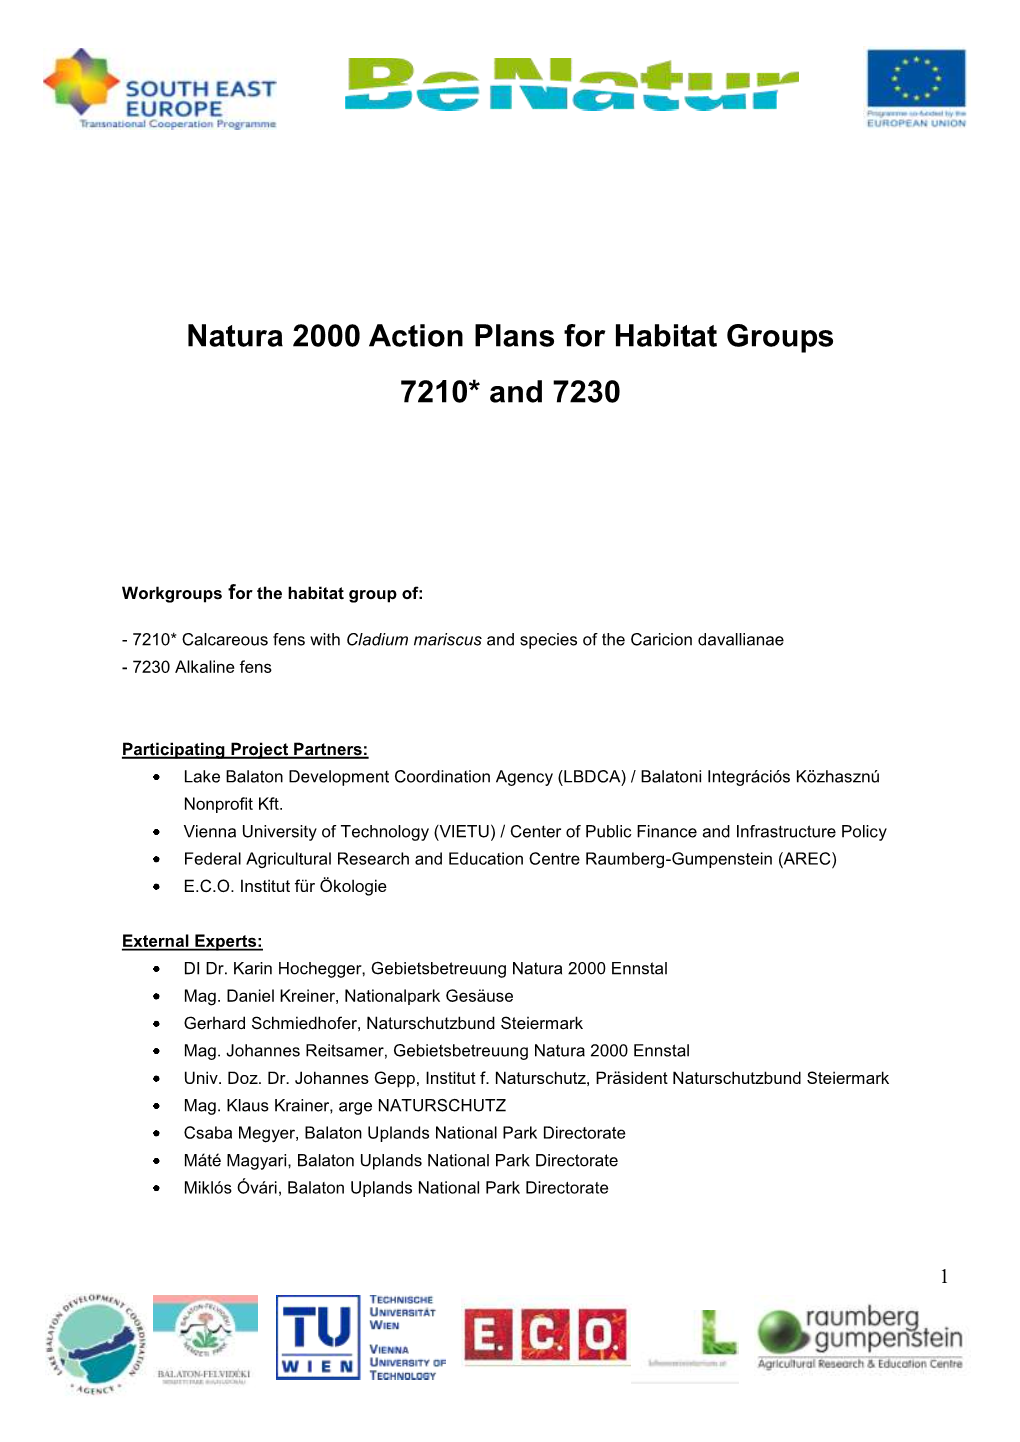 Joint Action Plan for the Conservation of Alkaline Fens and Caladium Fens